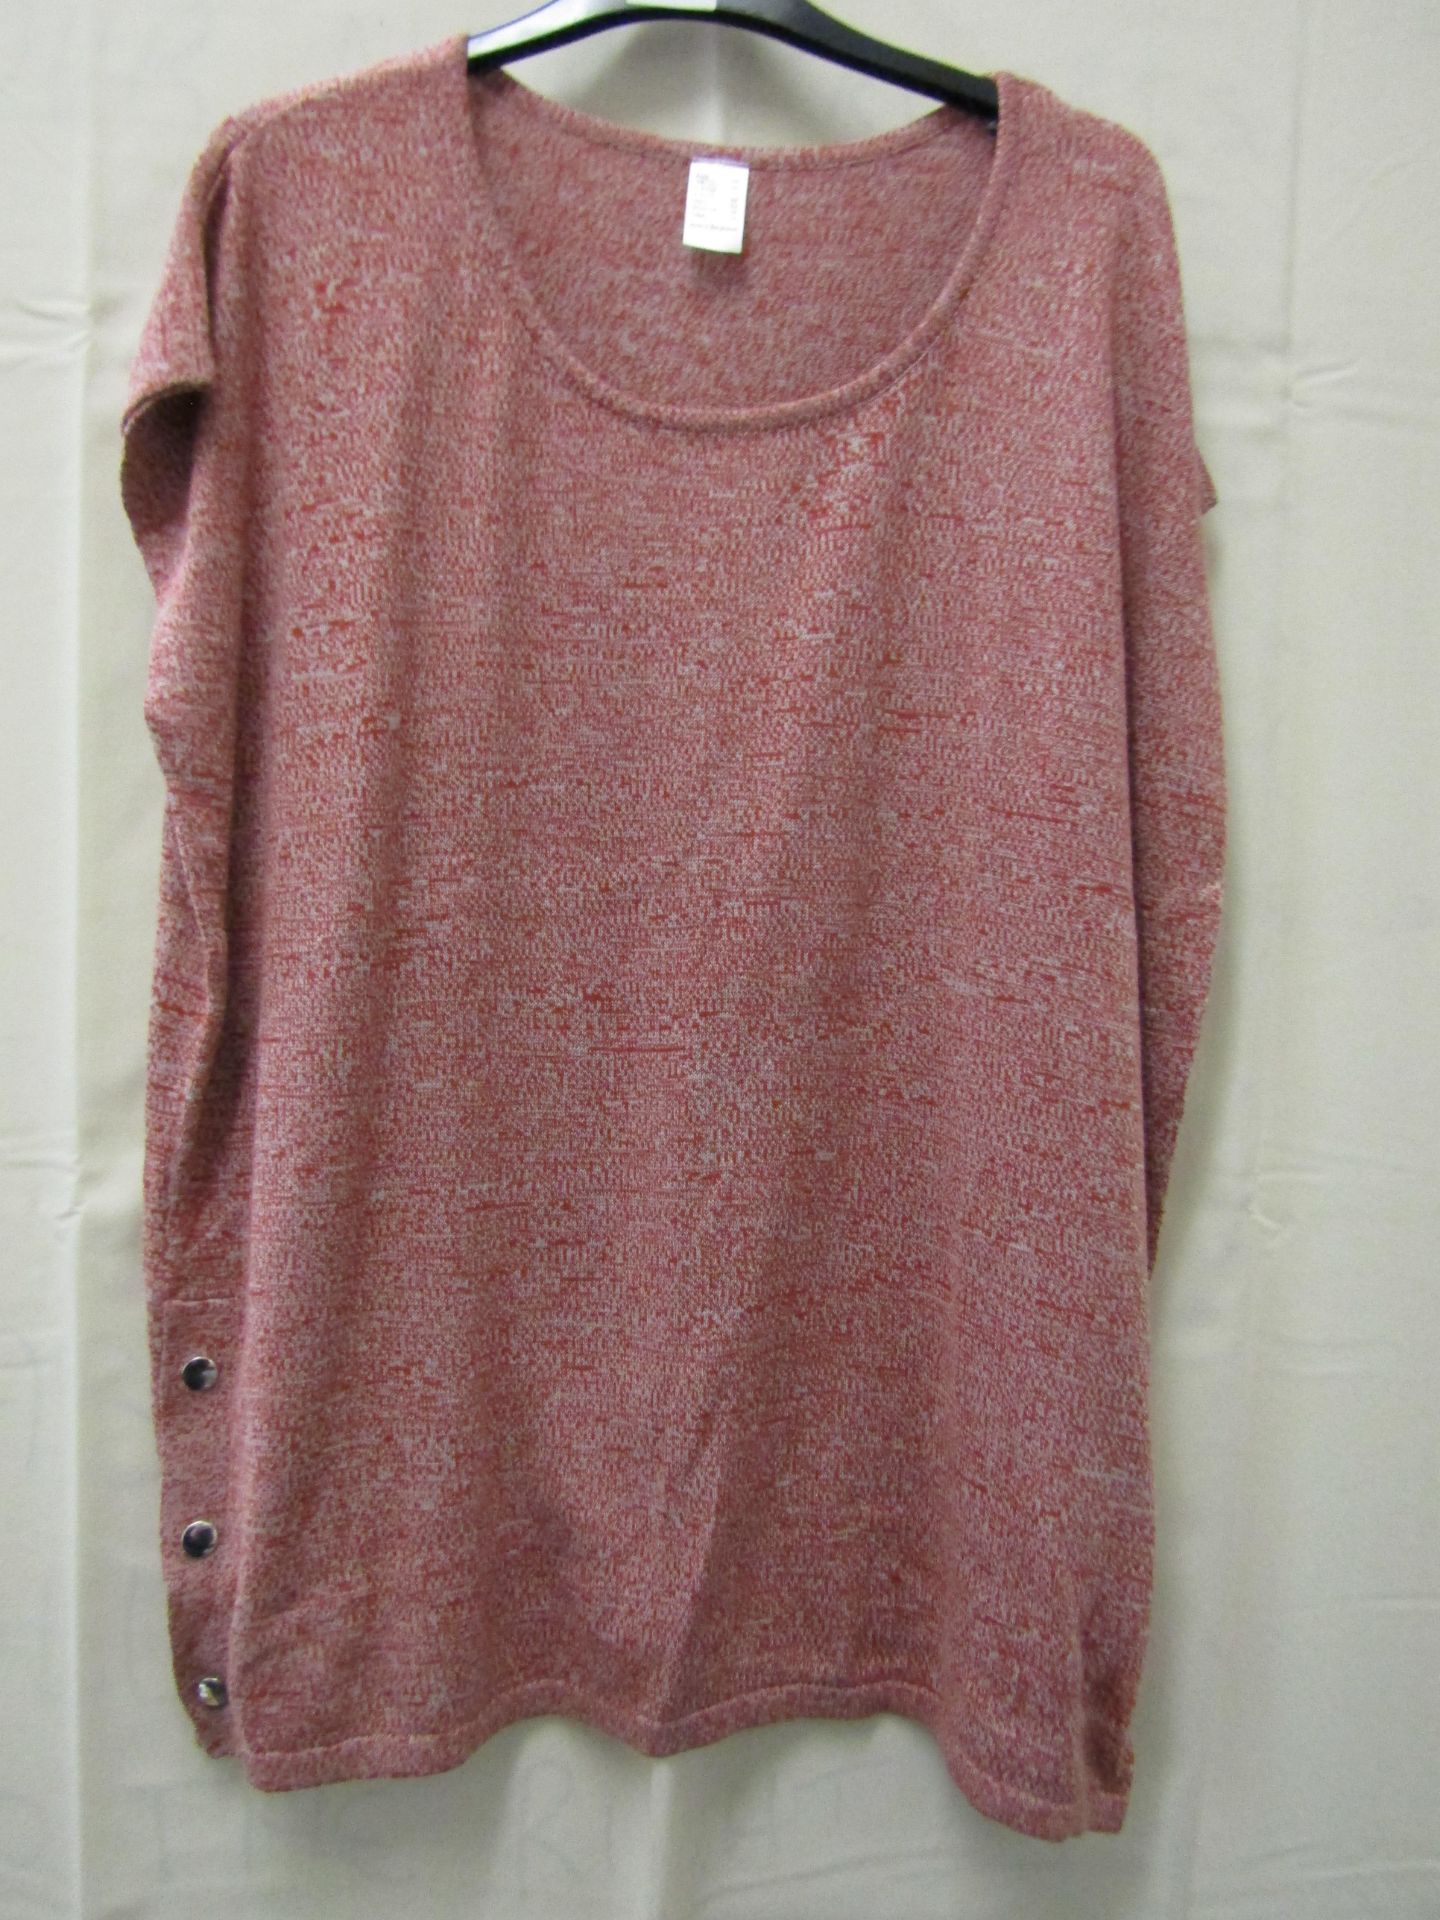 Unbranded Knitted Top Size 20 New No Tags